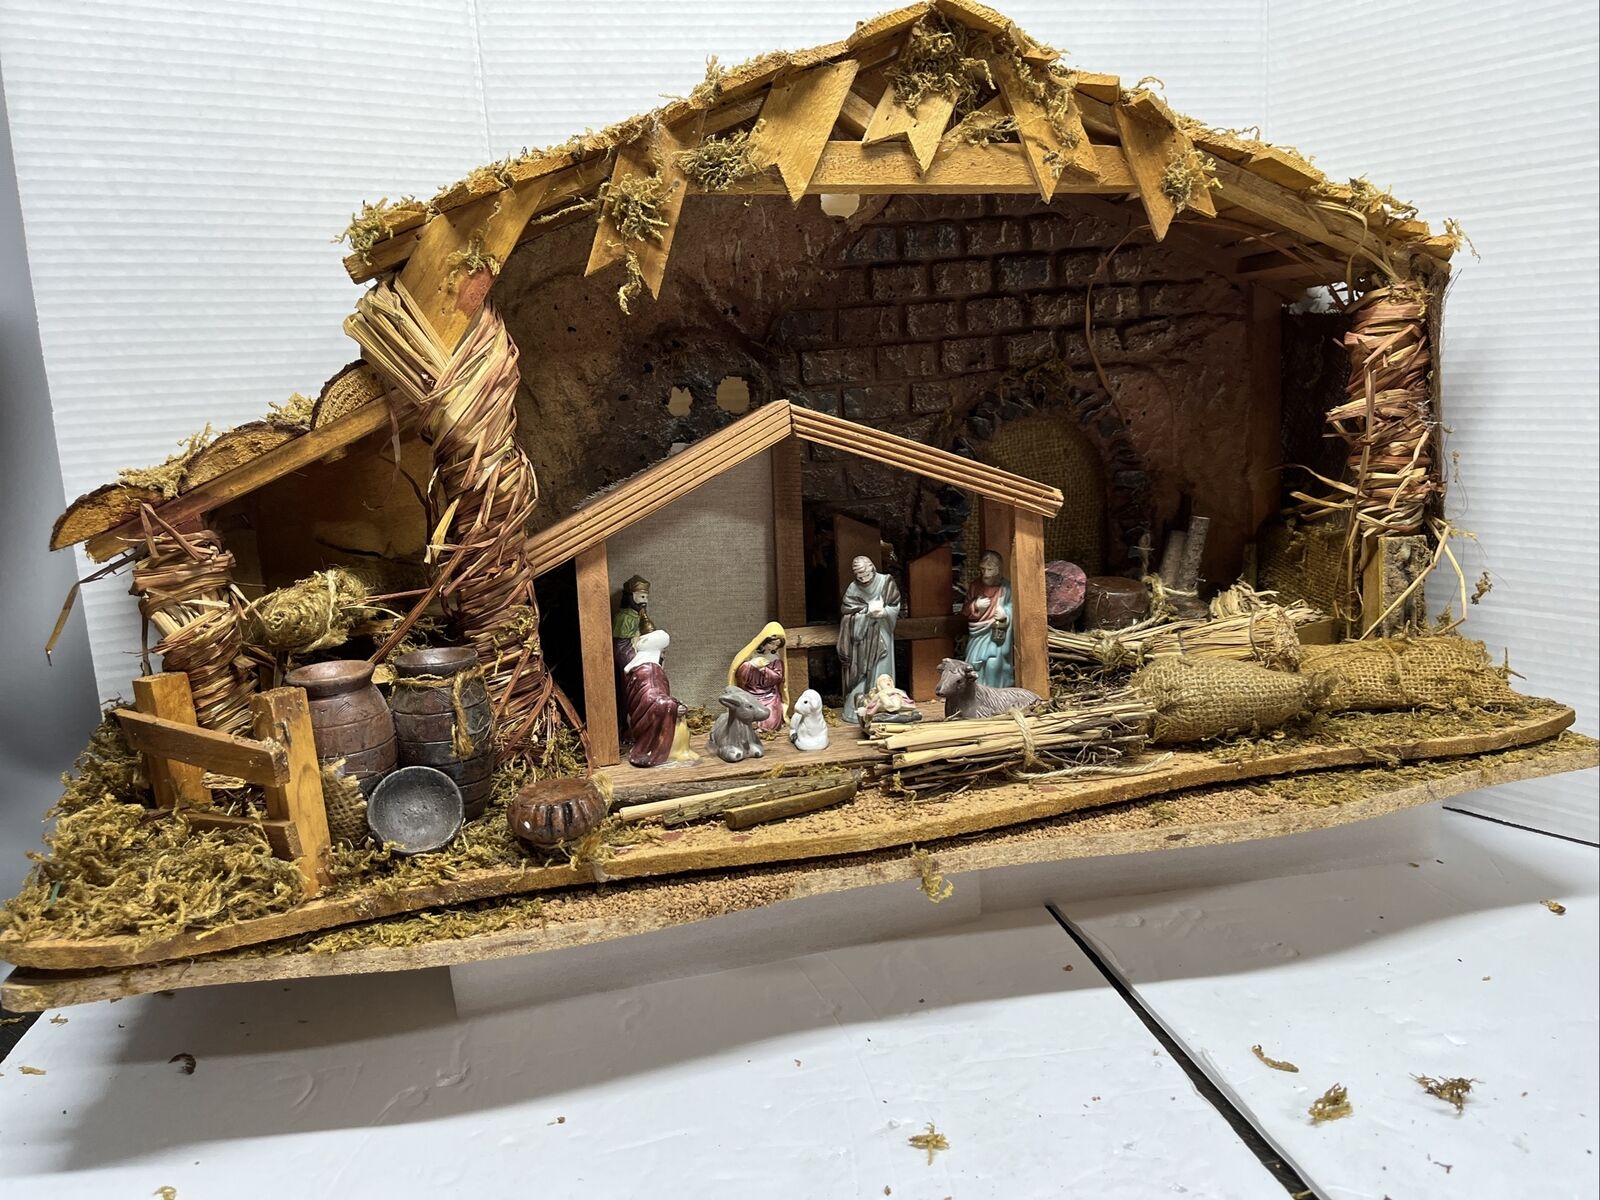 16 Piece Wood Creche And Accesory Set With Nativity Included - Slot For Light